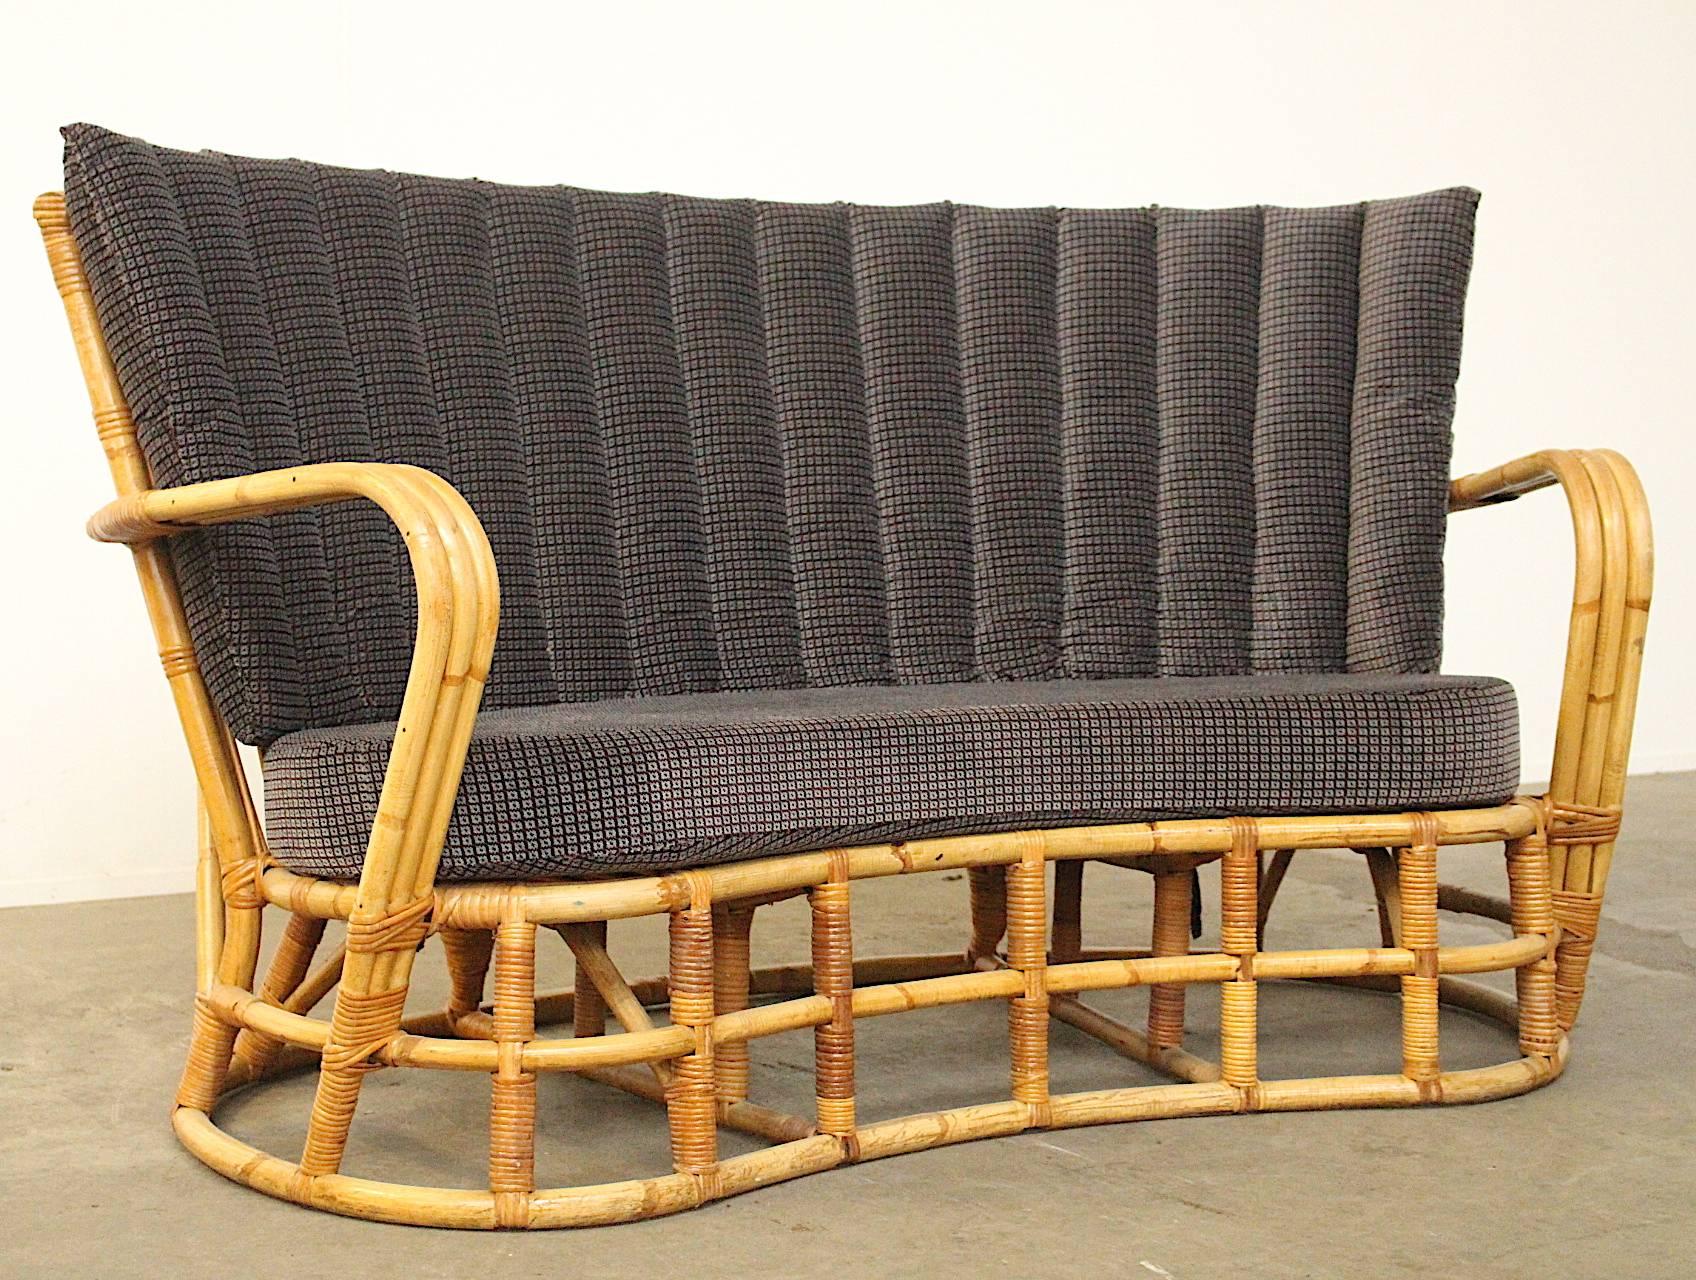 For all items from this dealer please hit the button VIEW ALL FROM SELLER below on this page

Stunning rattan sofa or settee in the style of Franco Albini and Giovanni Travasa. The sofa has beautiful organic curves and a wonderfully handcrafted